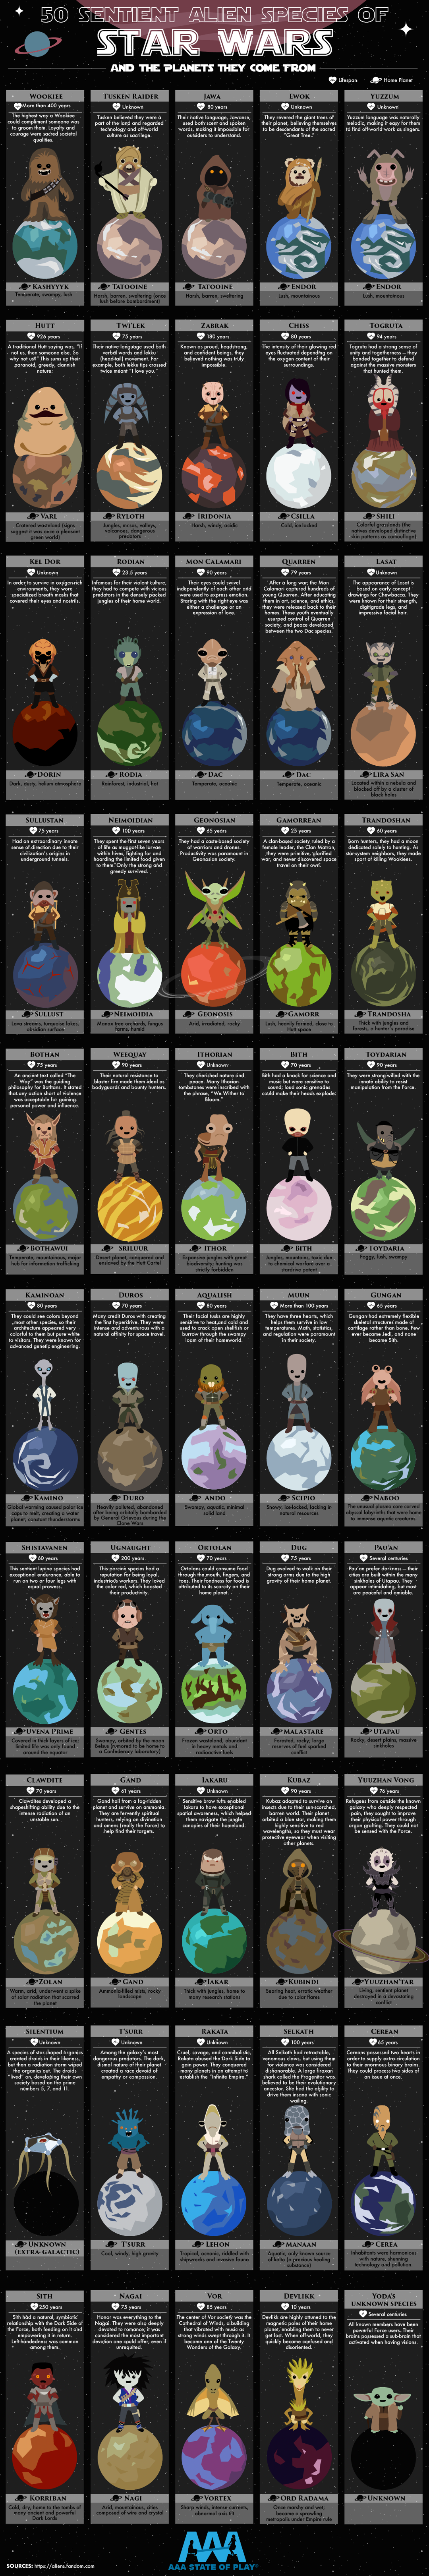 50 Sentient Alien Species from Star Wars and the Planets They Come From #infographic